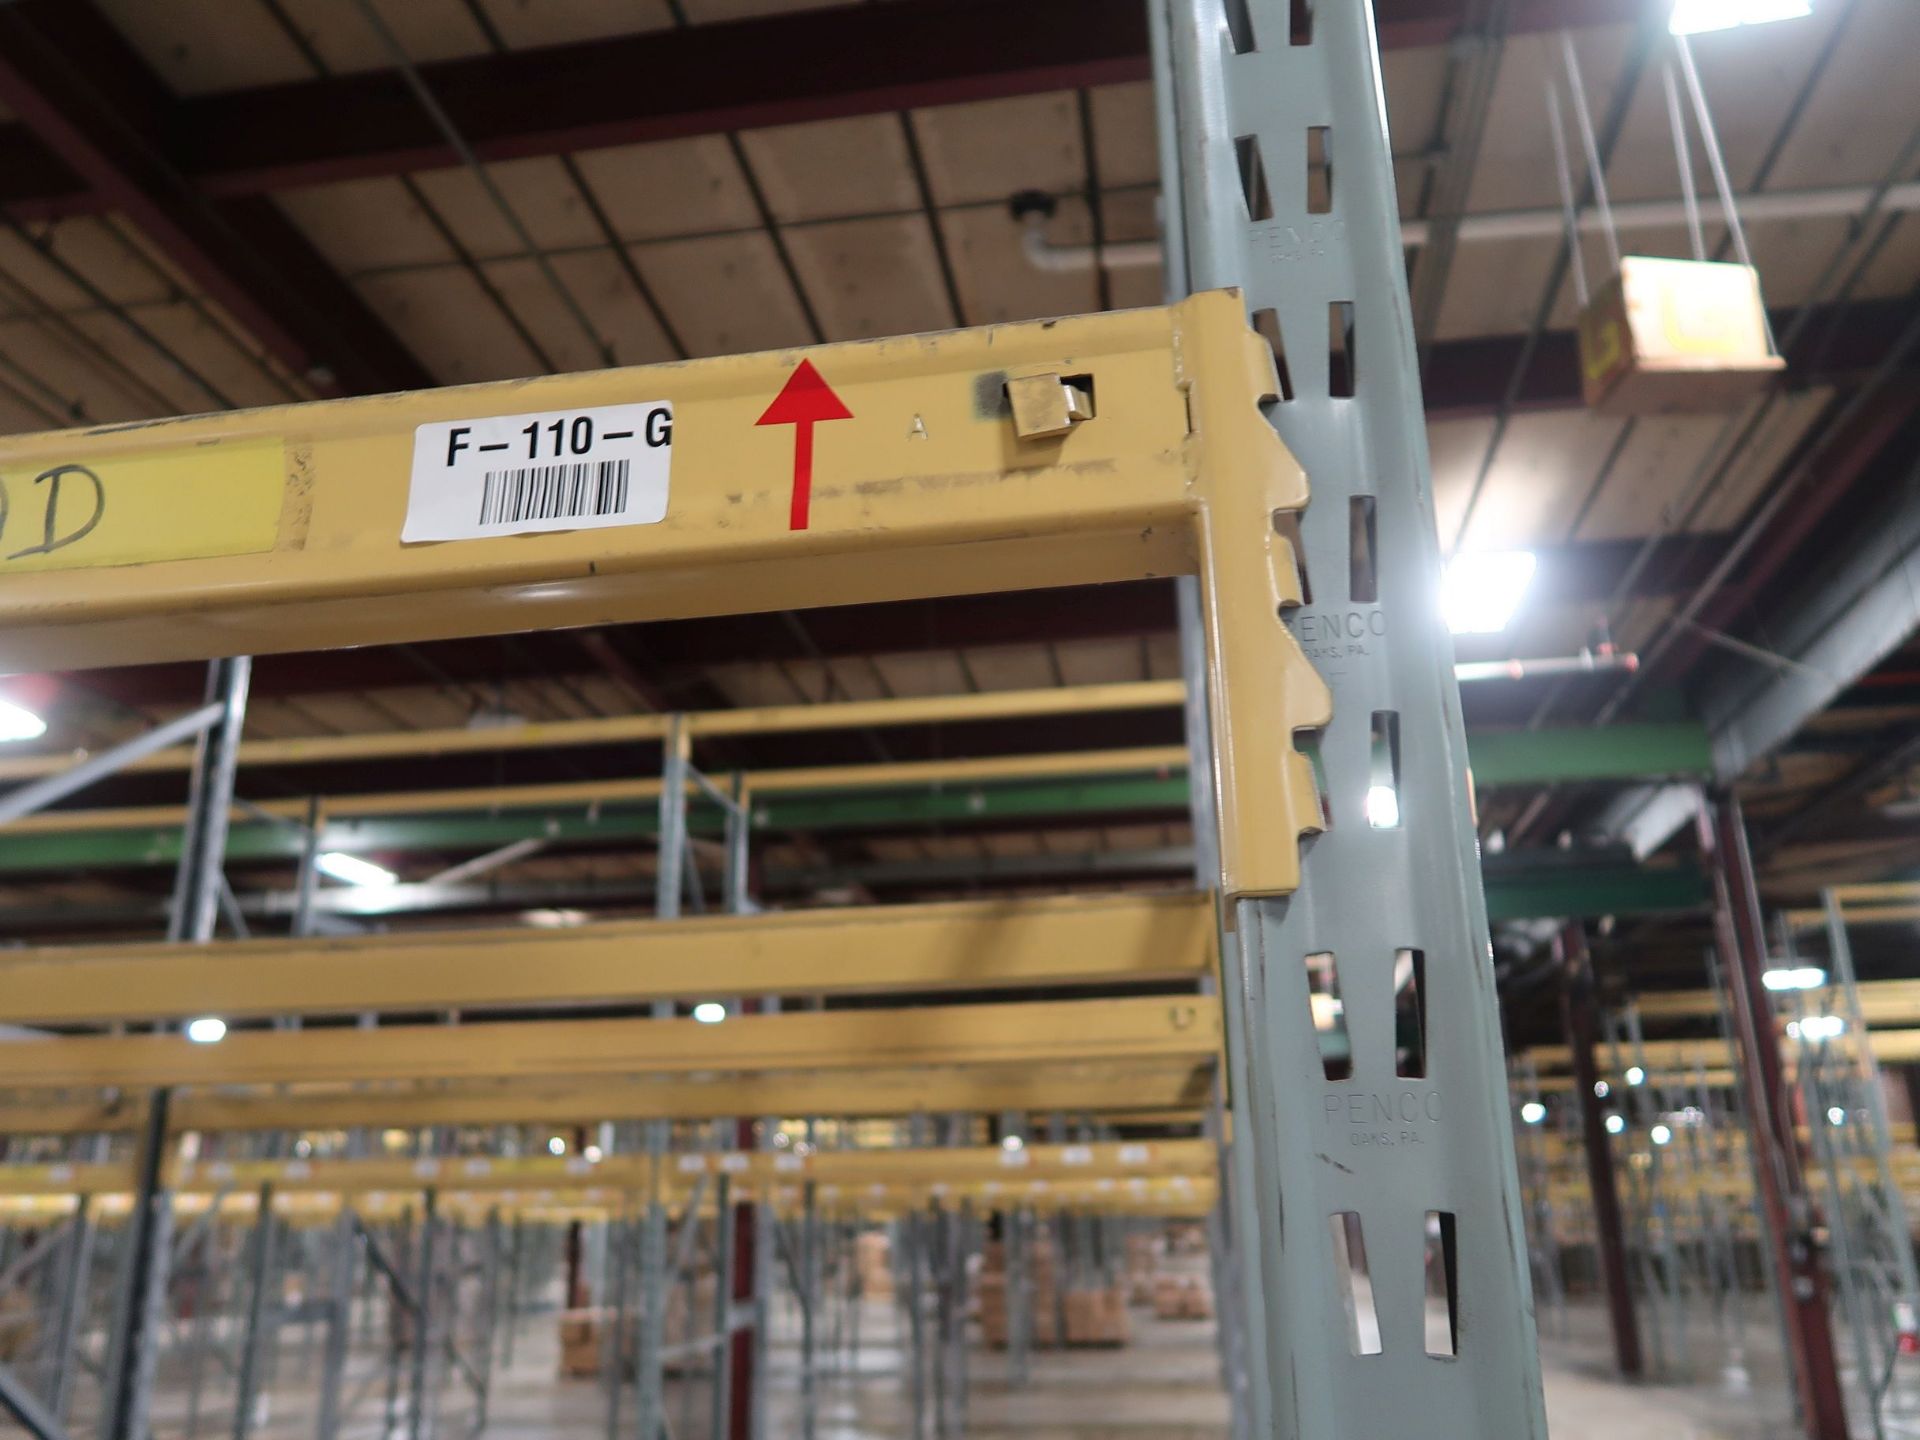 SECTIONS - (14) SECTIONS 96" X 42" X 168" & (14) SECTIONS 96" X 42" X 144" ADJUSTABLE BEAM PALLET - Image 3 of 3